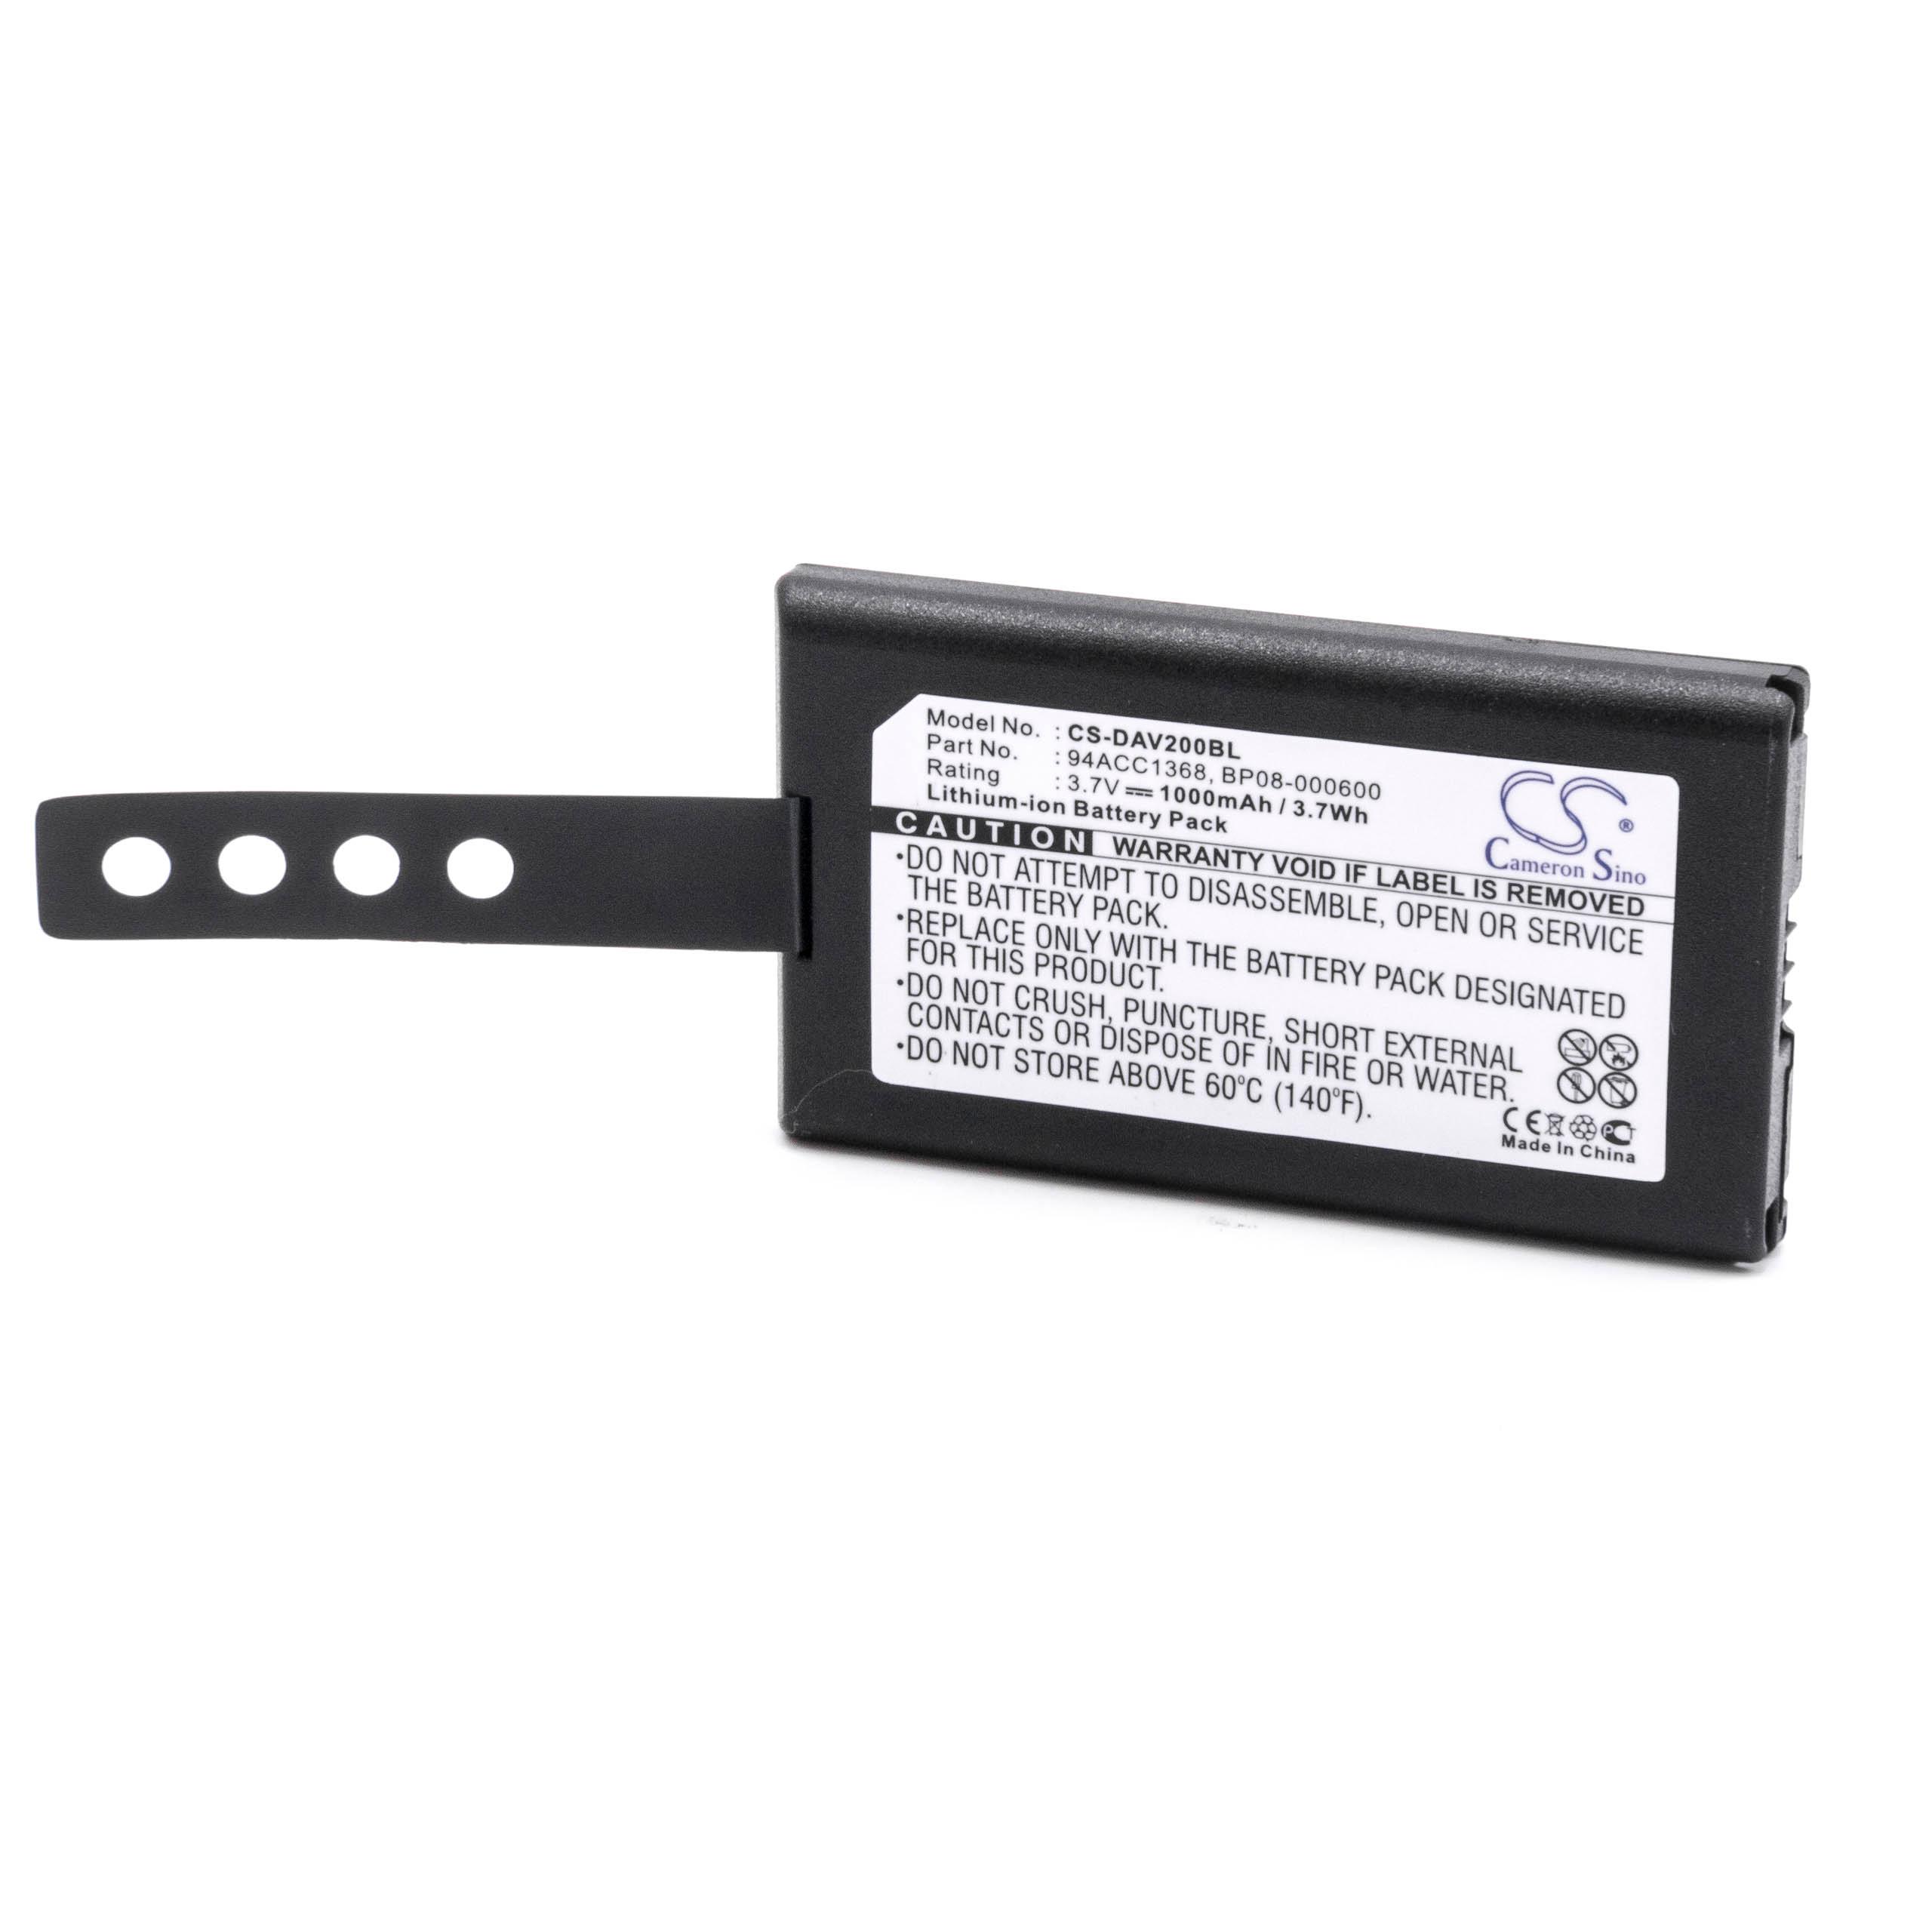 Barcode Scanner POS Battery Replacement for Datalogic 11300794, 3H21-00000370, 800065-56 - 1000mAh 3.7V Li-Ion